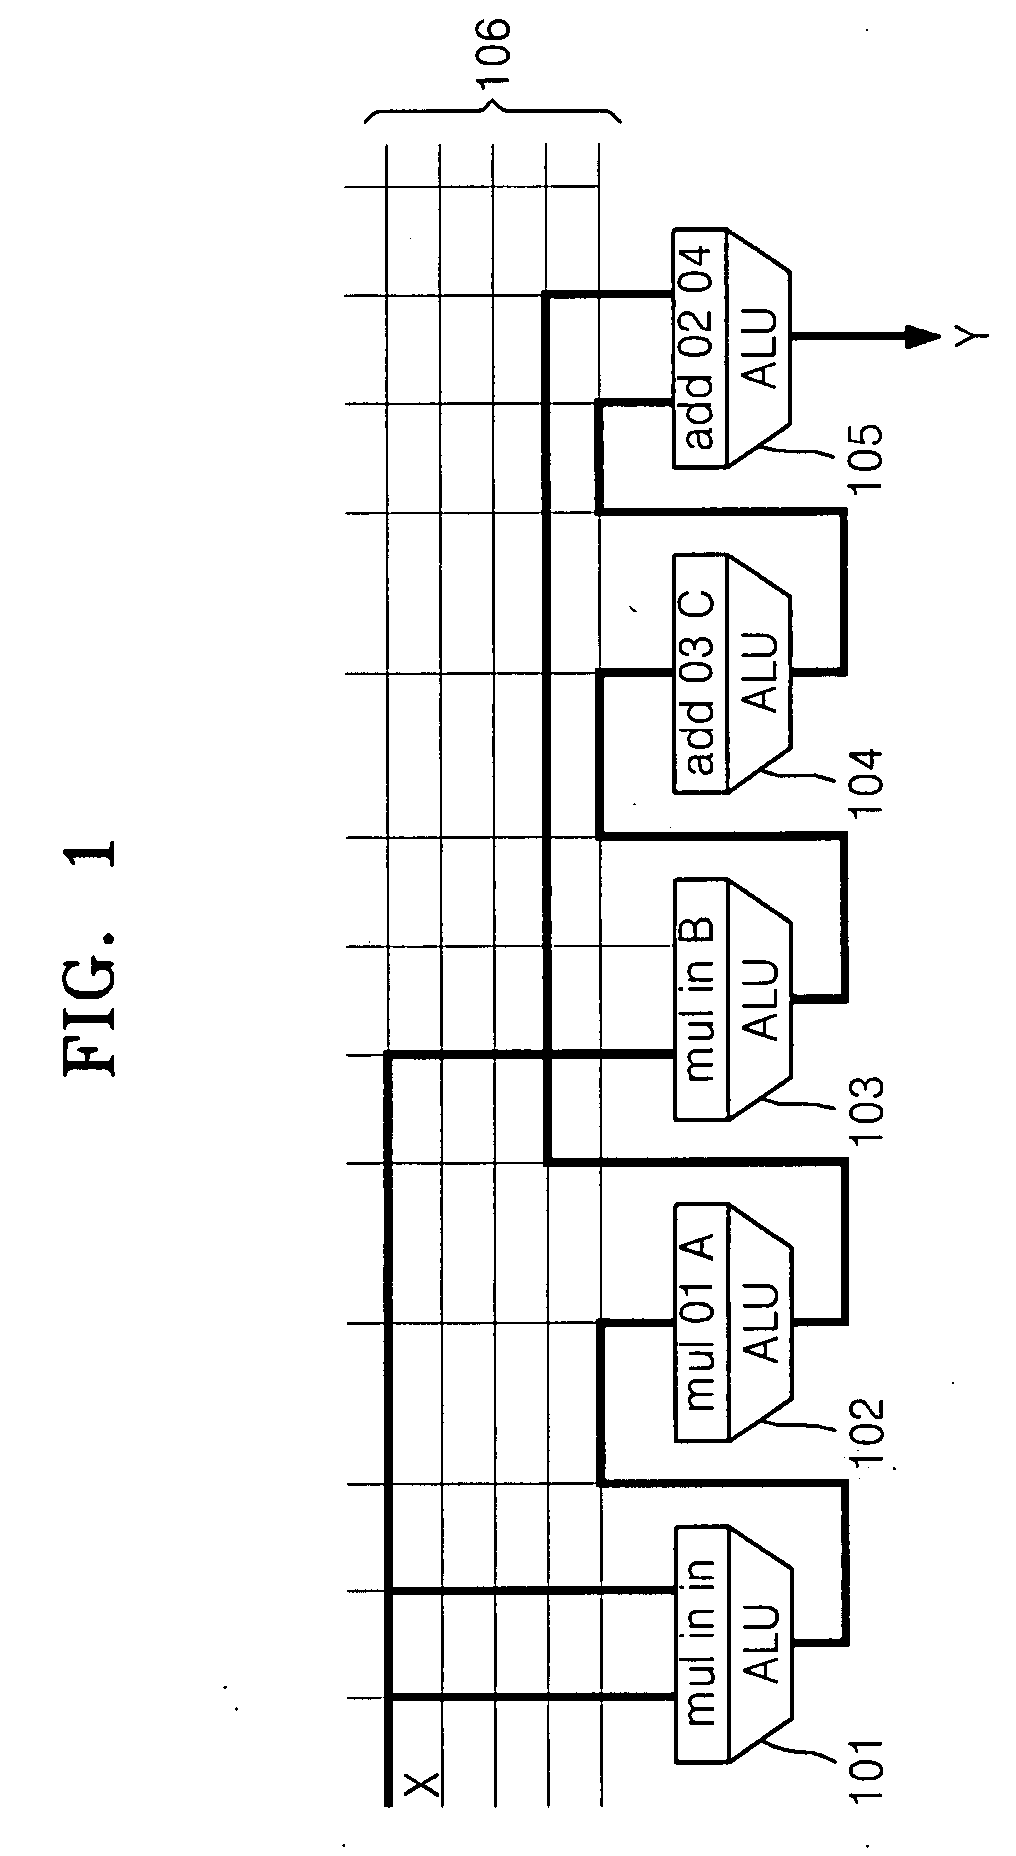 Multitasking method and apparatus for reconfigurable array